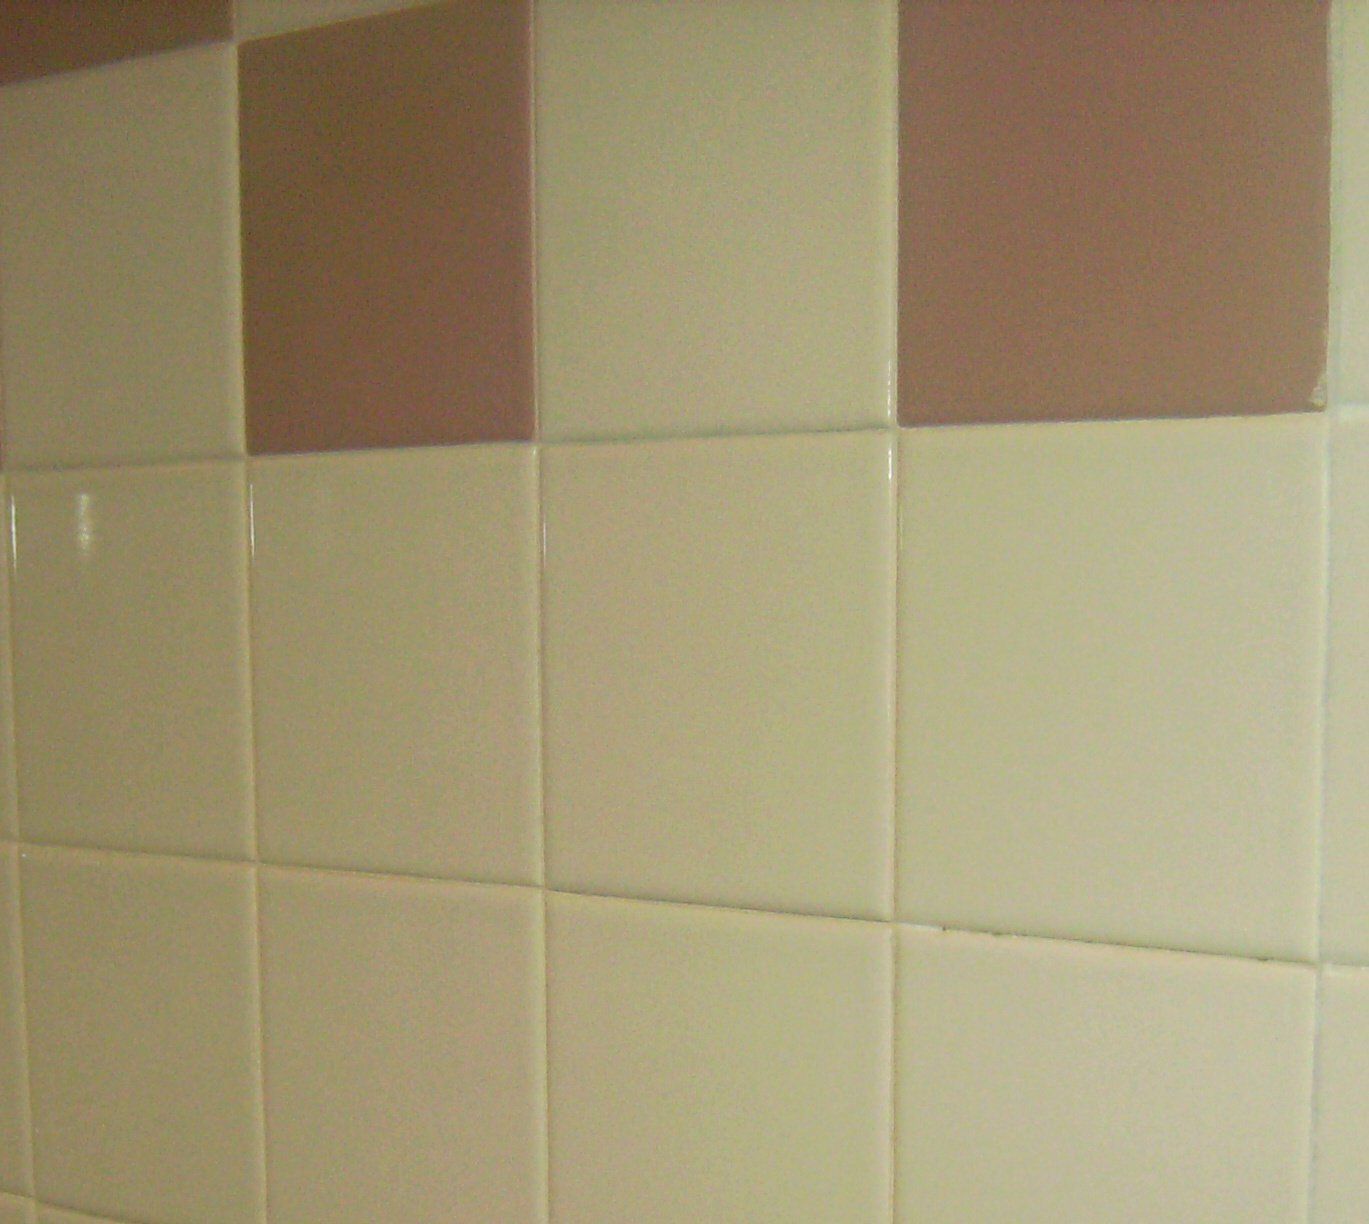 grout and tile after